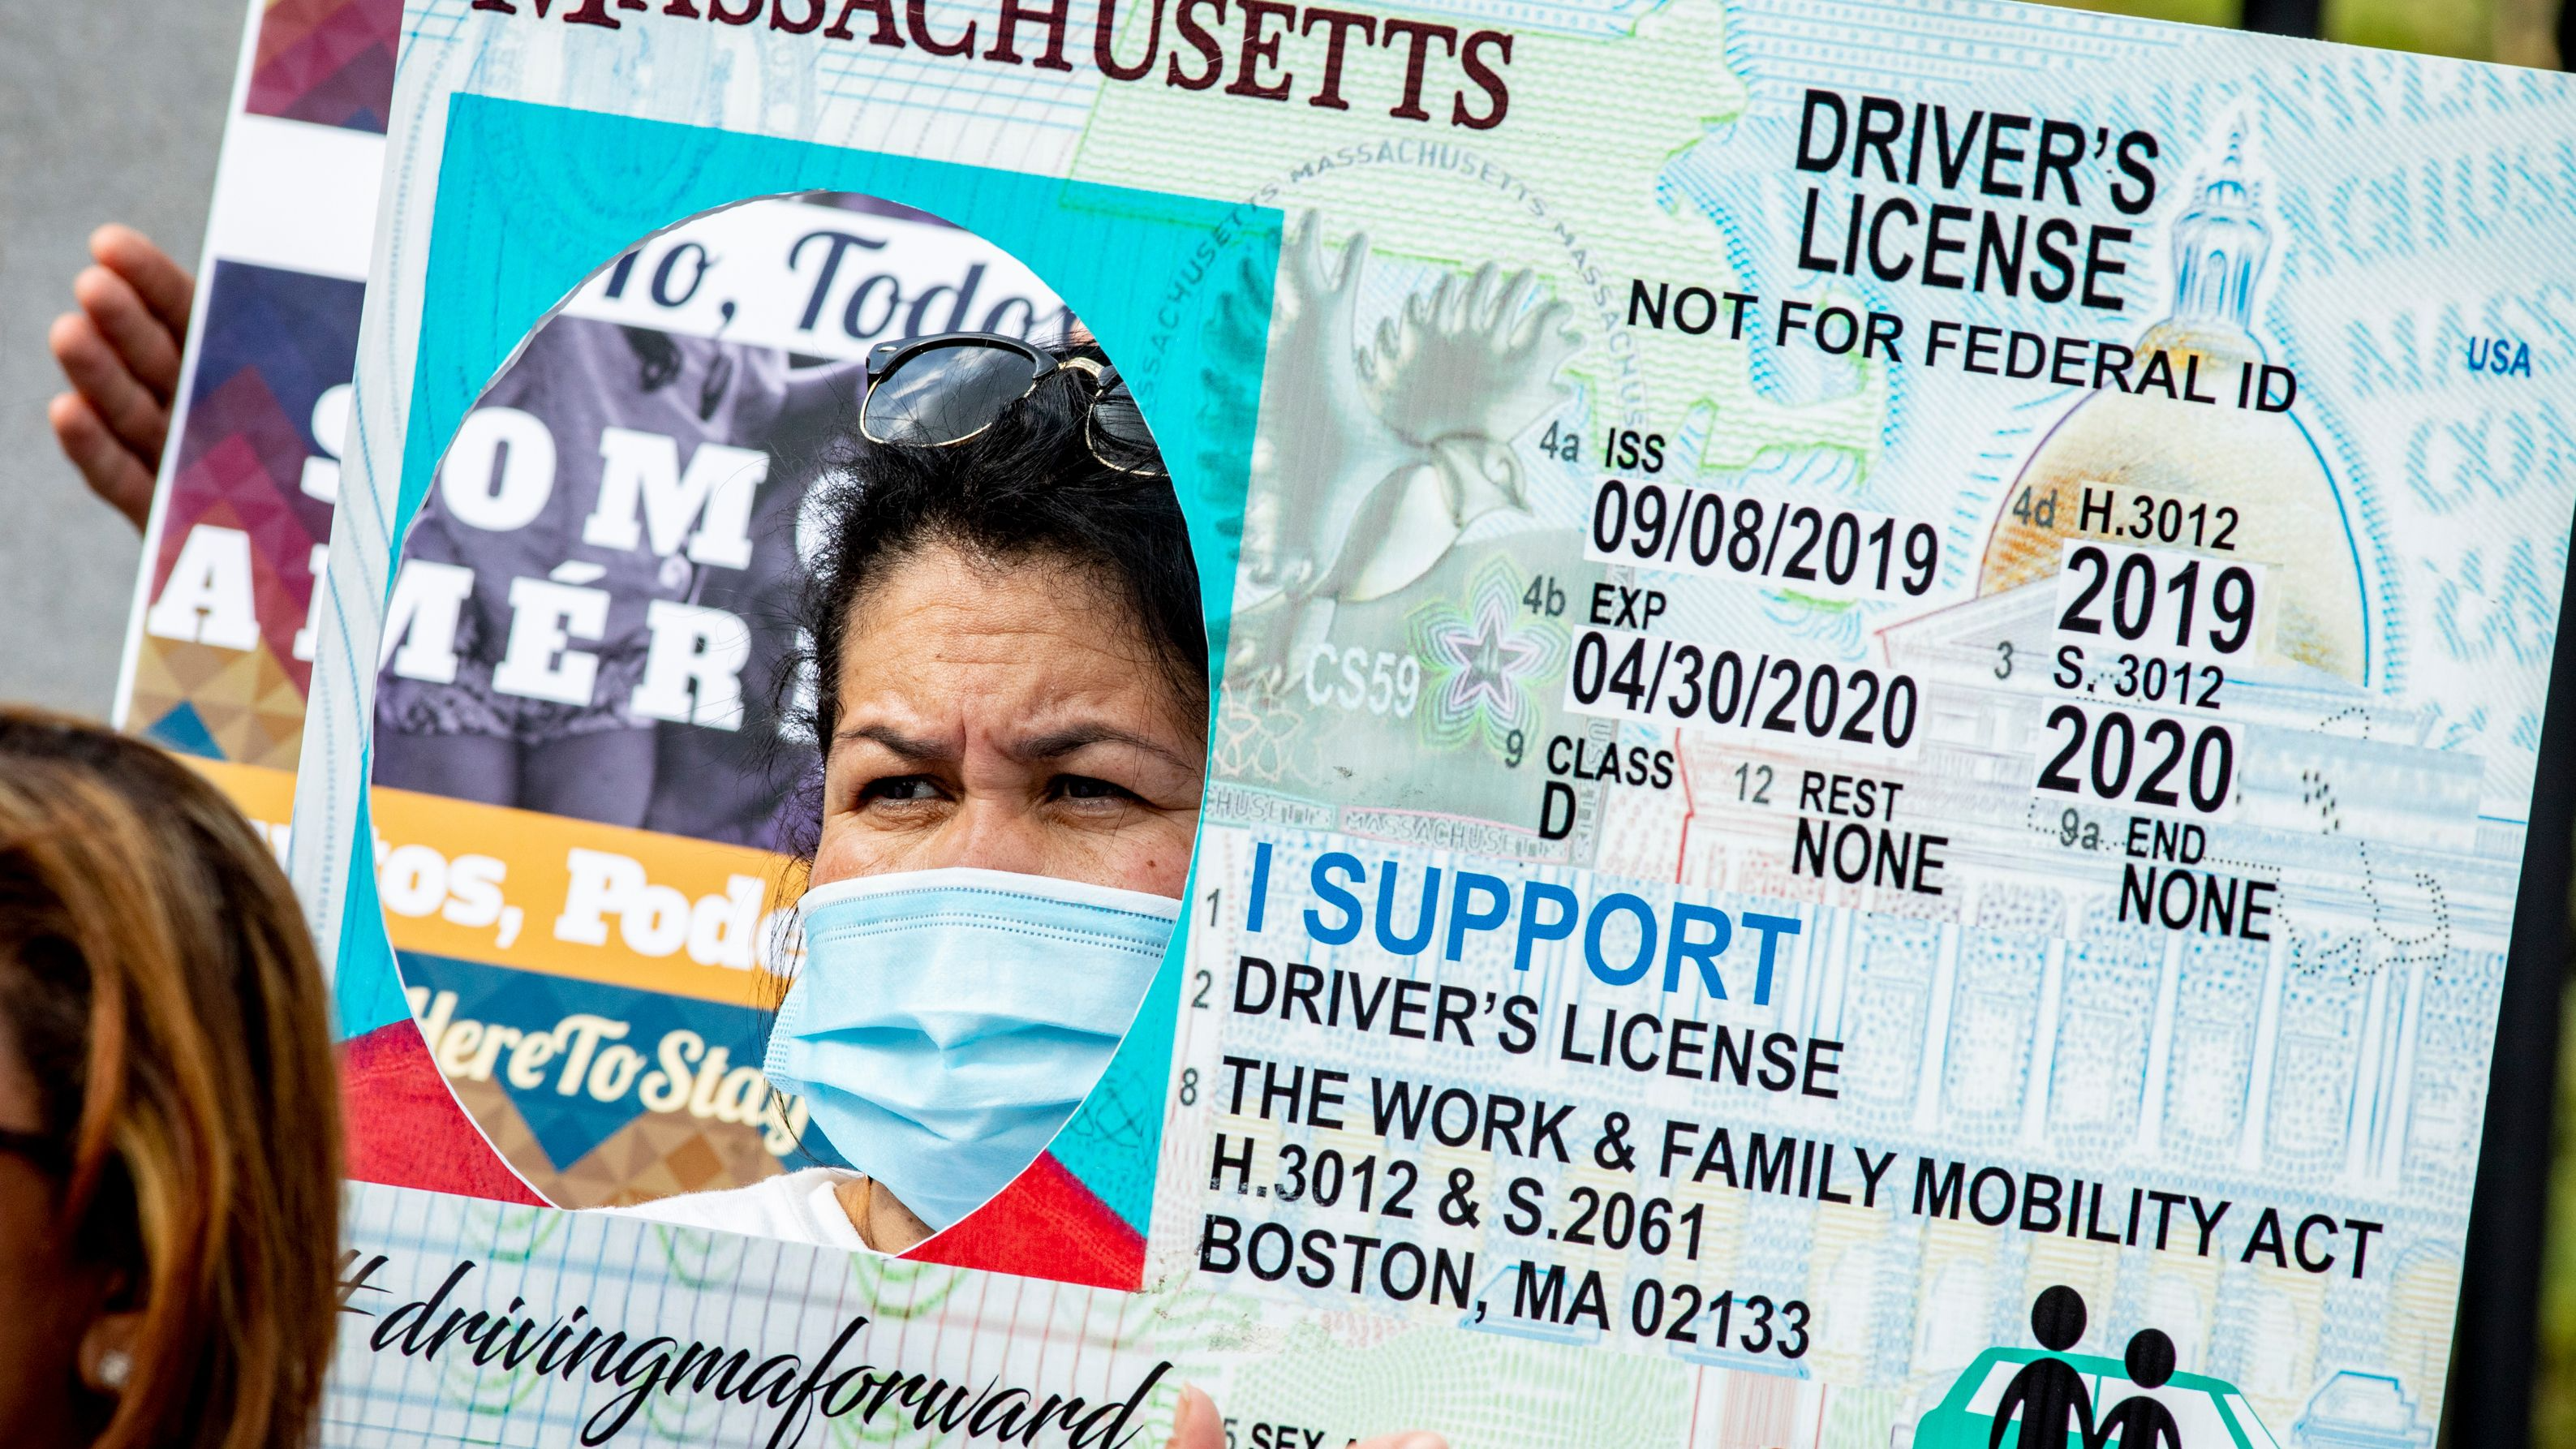 Mass. licenses for immigrants will be honored in Florida